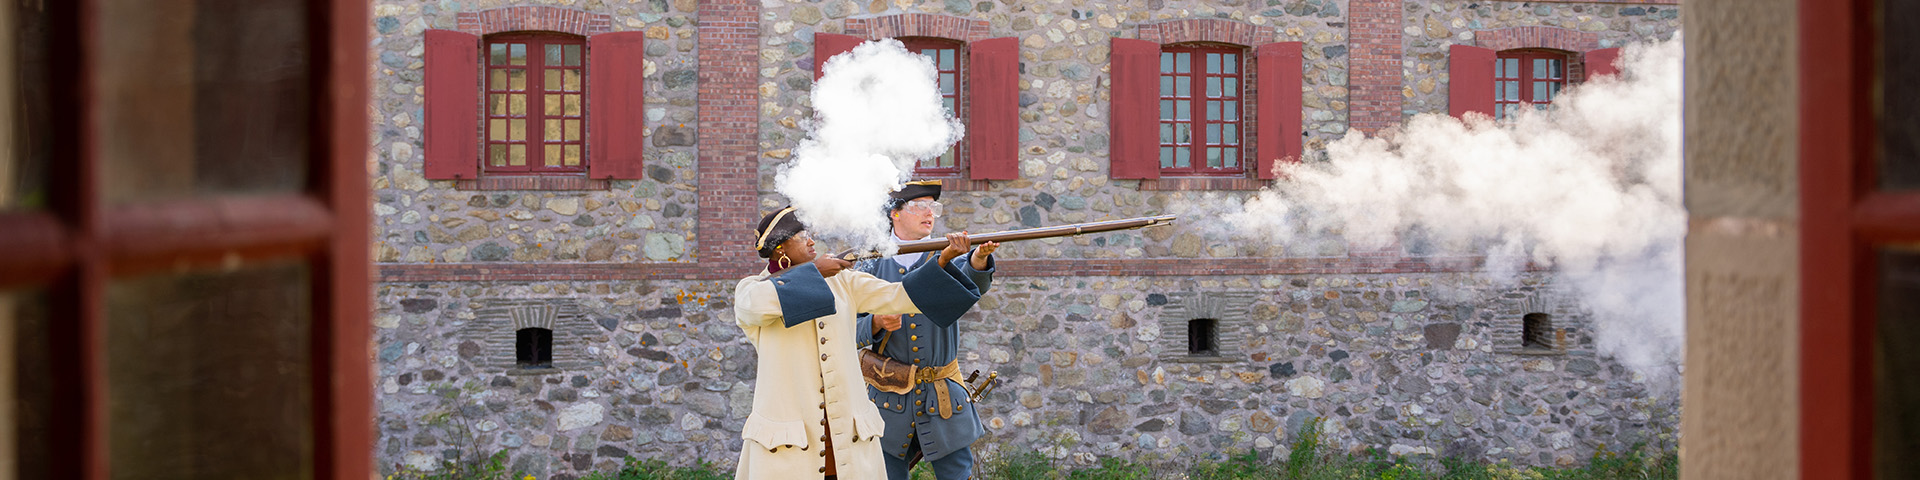 a visitor fires a musket with a costumed solider, there is smoke in the air to the right of them.